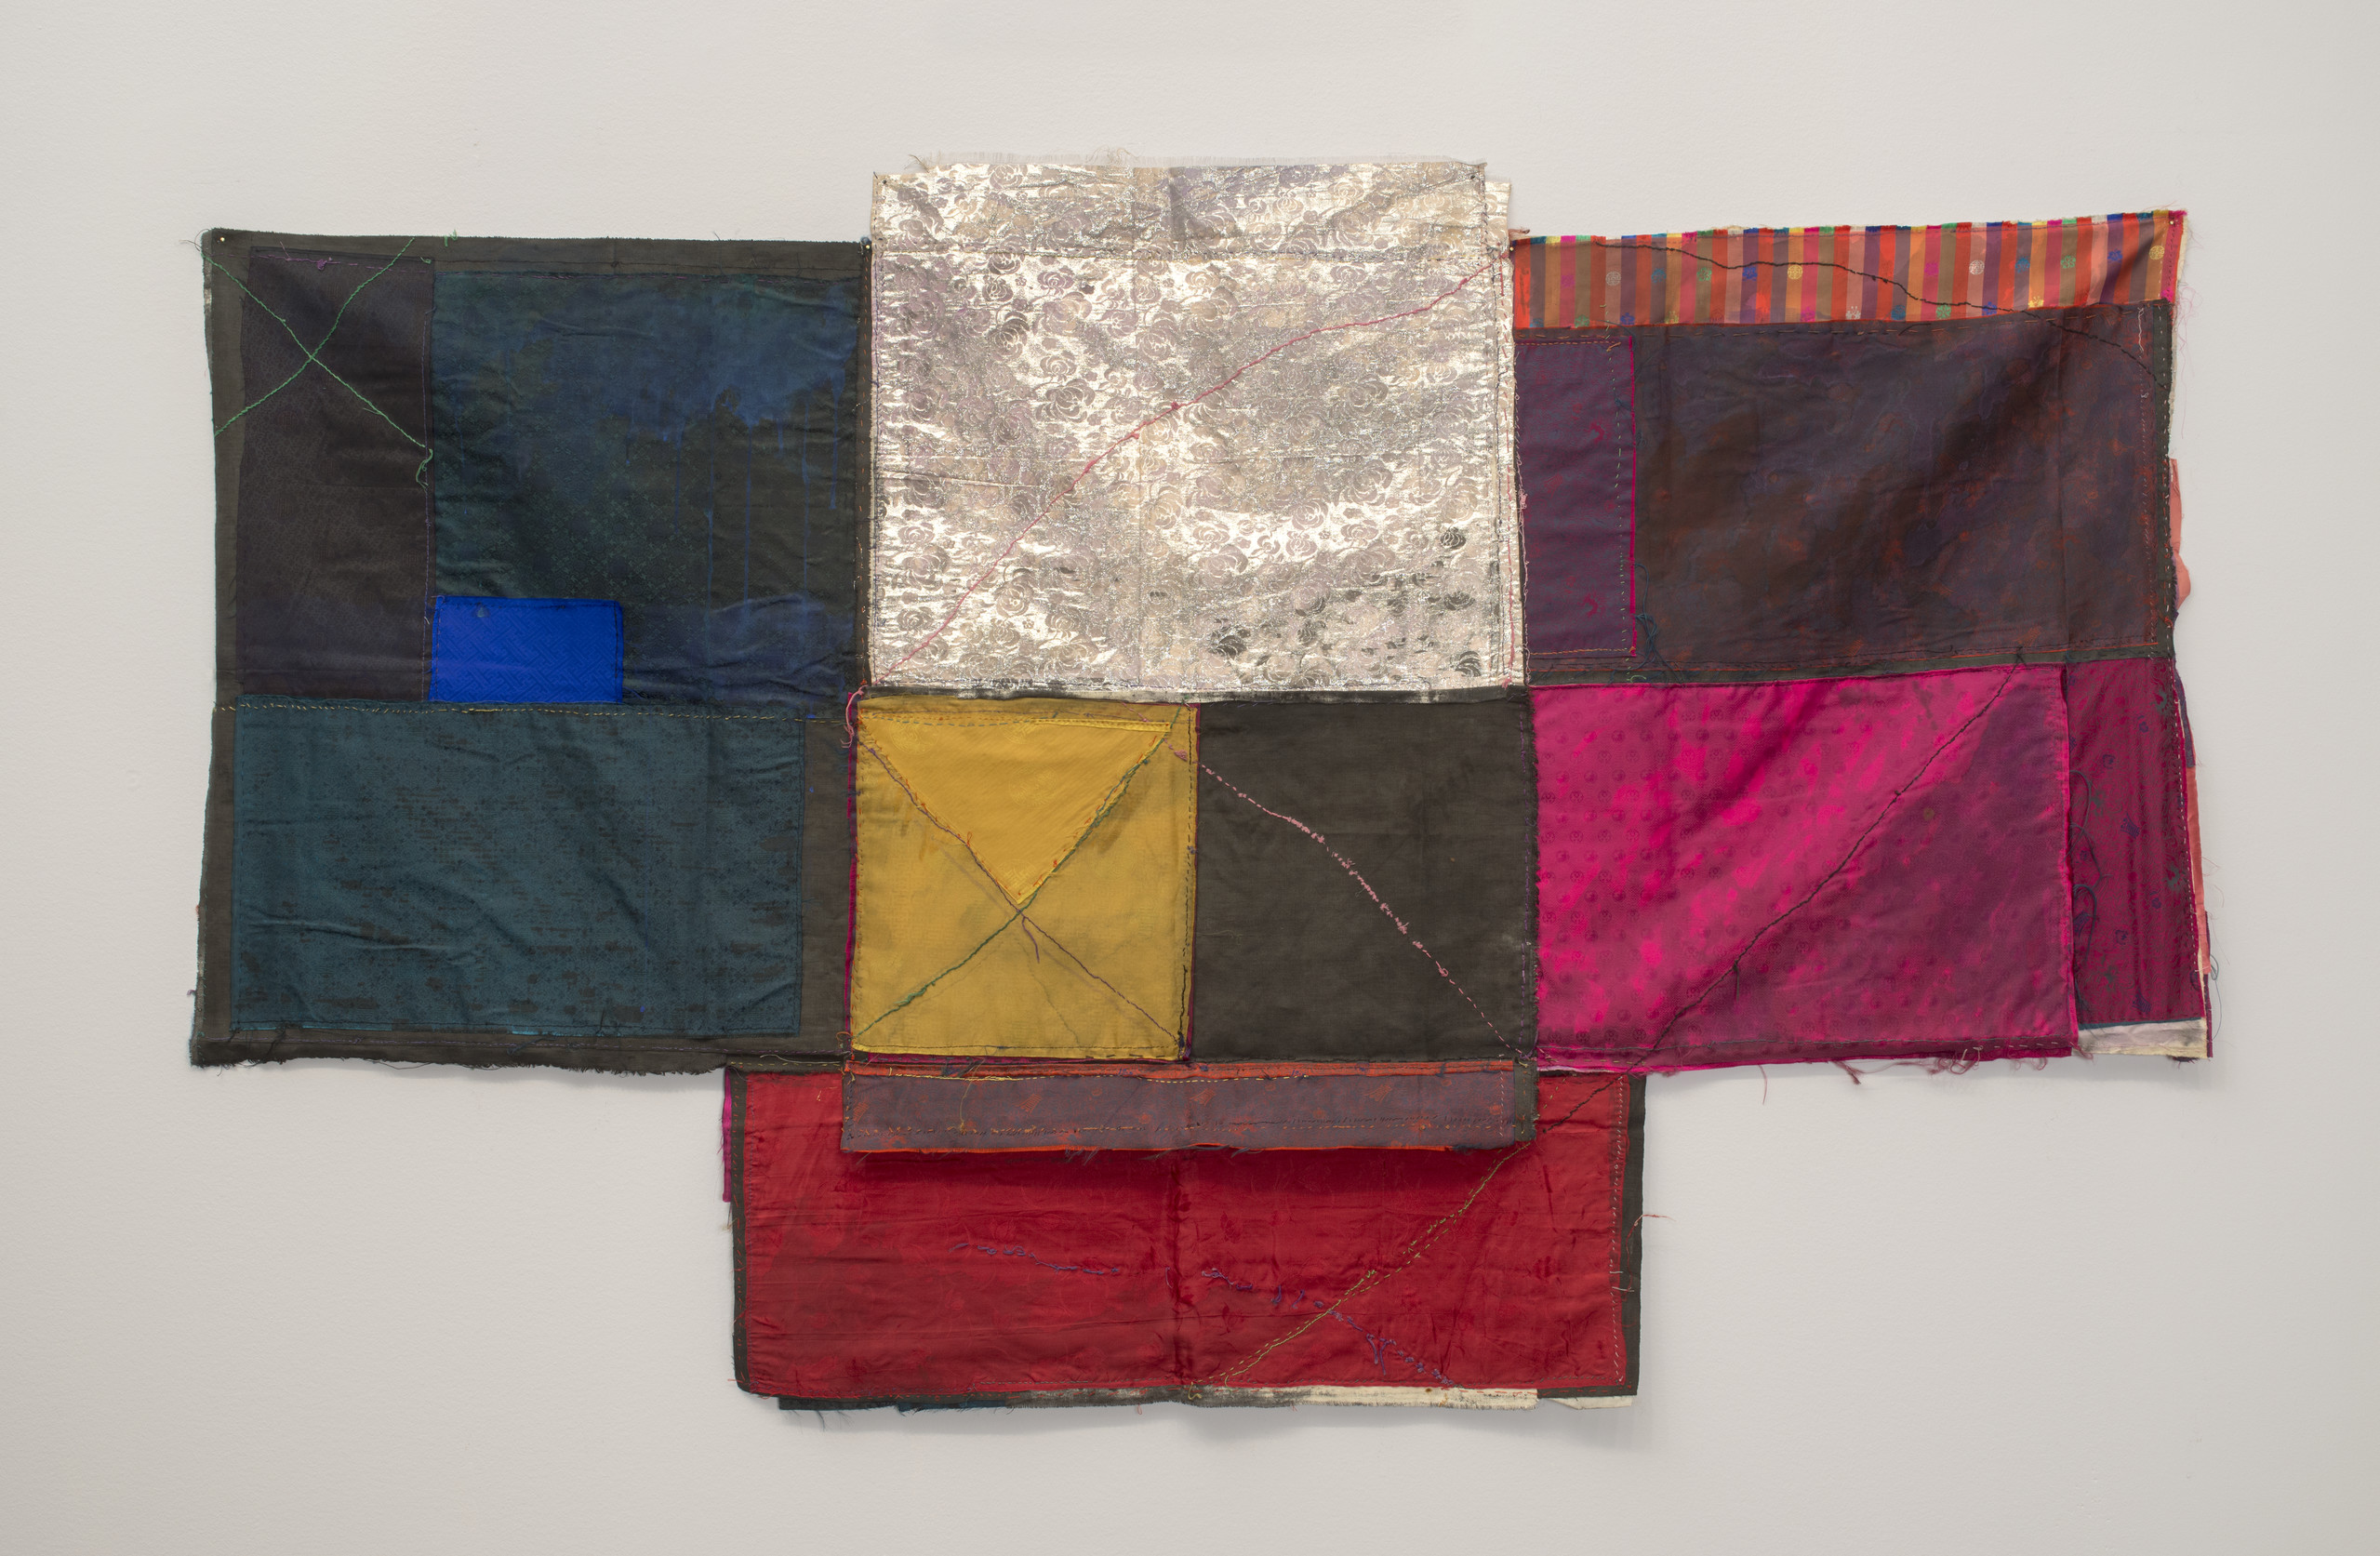 Textile collage of cloth folded and stitched together in loose geometric formations with visible seams making linear patterns. Deep blues on the left and warm colors on the right frame blocks of silver, yellow and grey in the center, which extends into a slightly longer base.